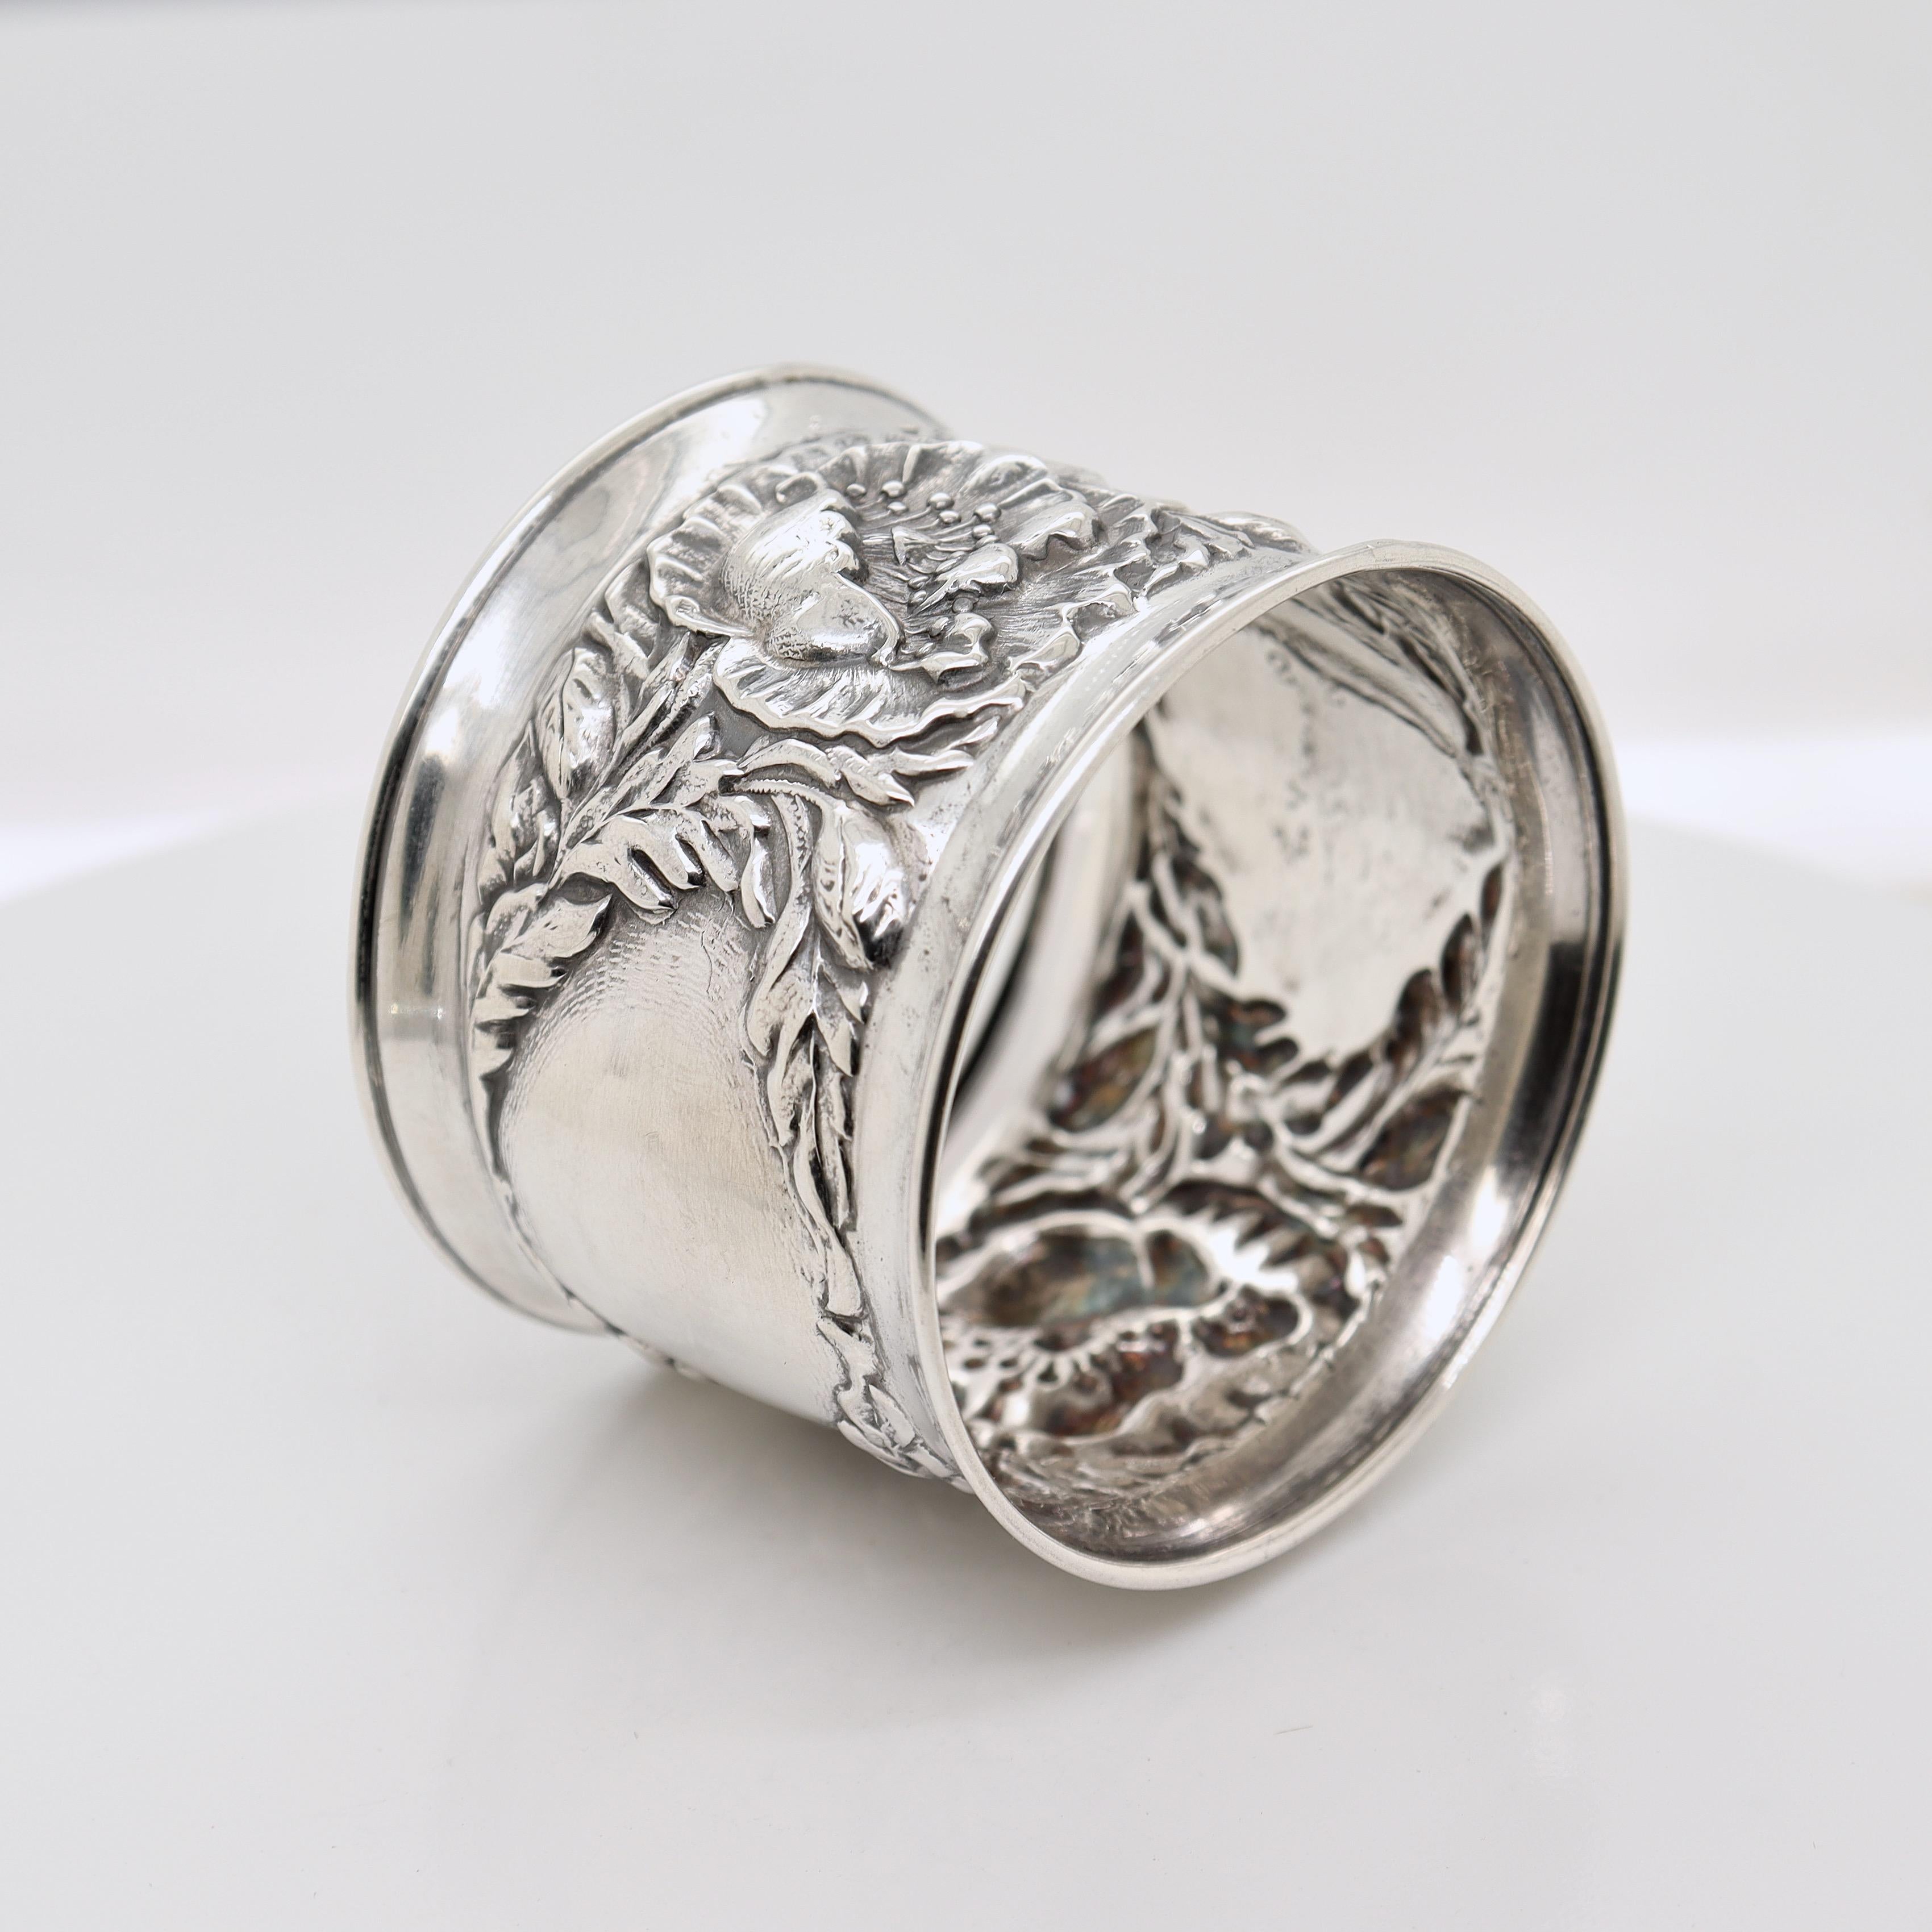 Antique Art Nouveau Sterling Silver Napkin Ring with Poppy Flowers For Sale 3